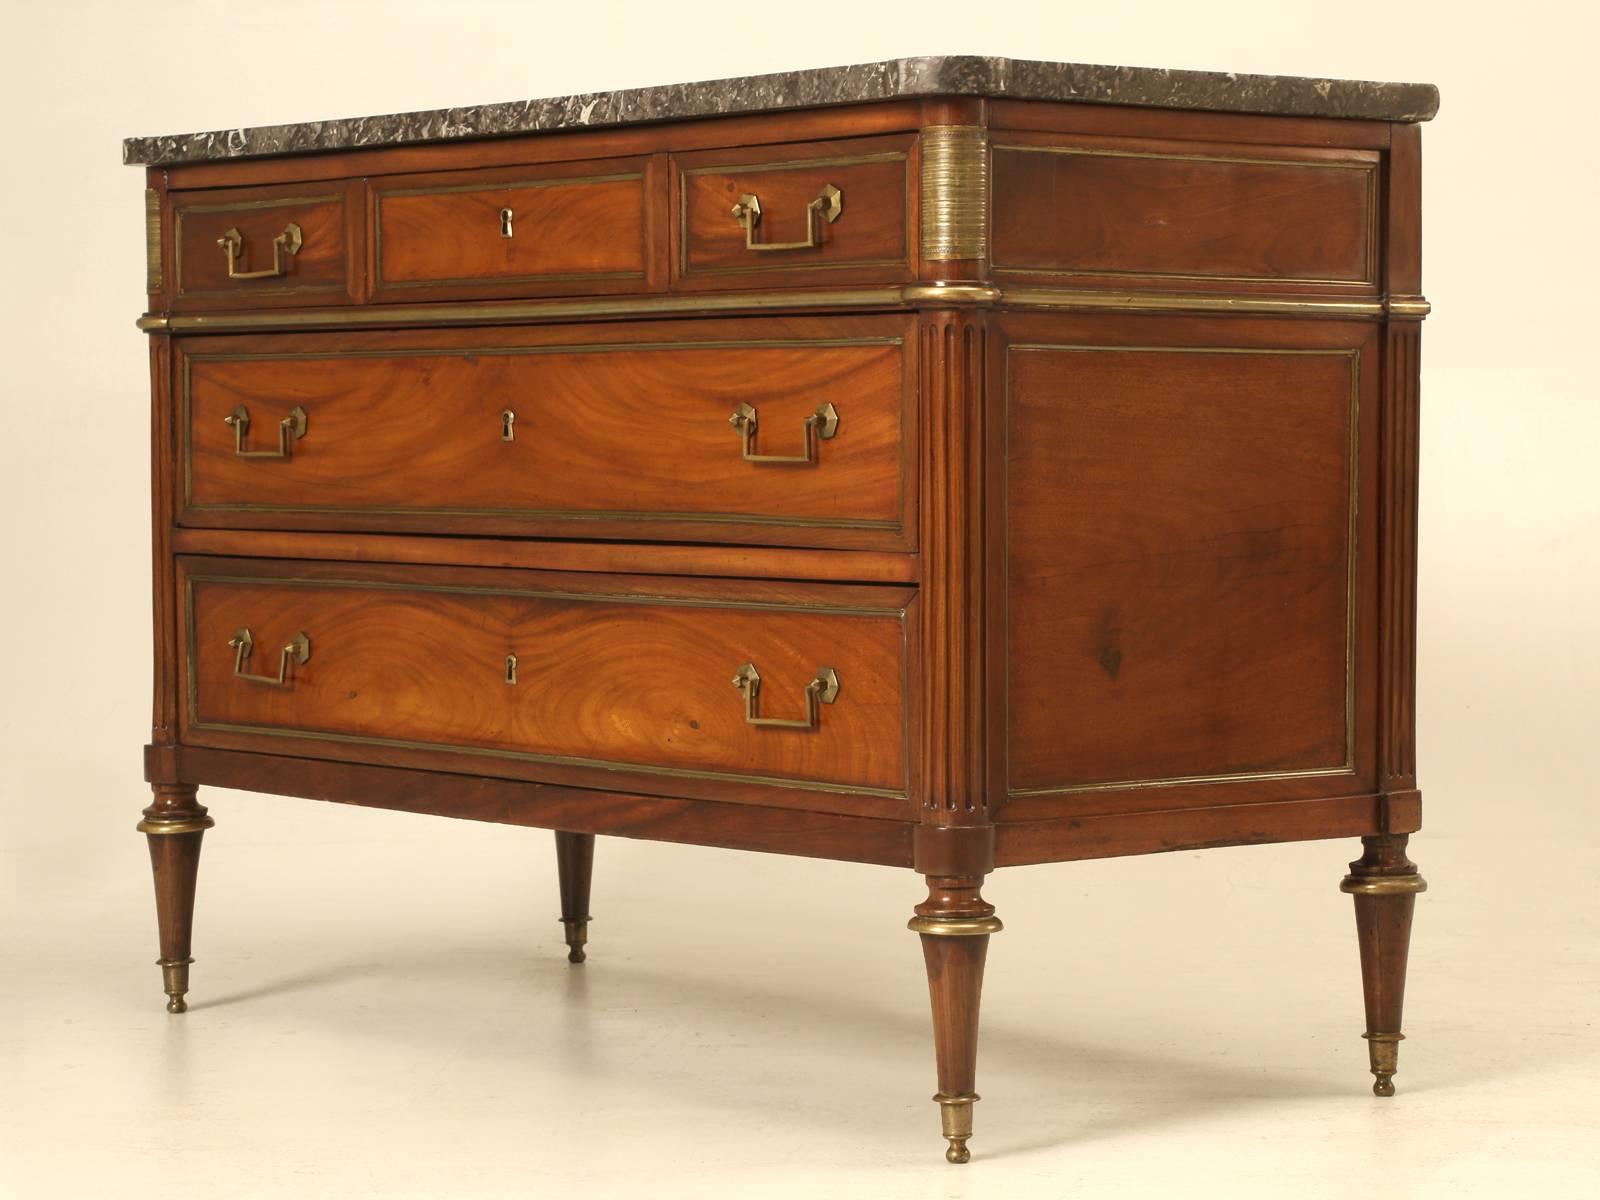 Antique French commode in mahogany with a Sainte Anne grey marble top. The graining of the boards chosen for this chest were so beautiful that we simply could not bring ourselves to ebonize it and even knowing it would probably take longer to sell.